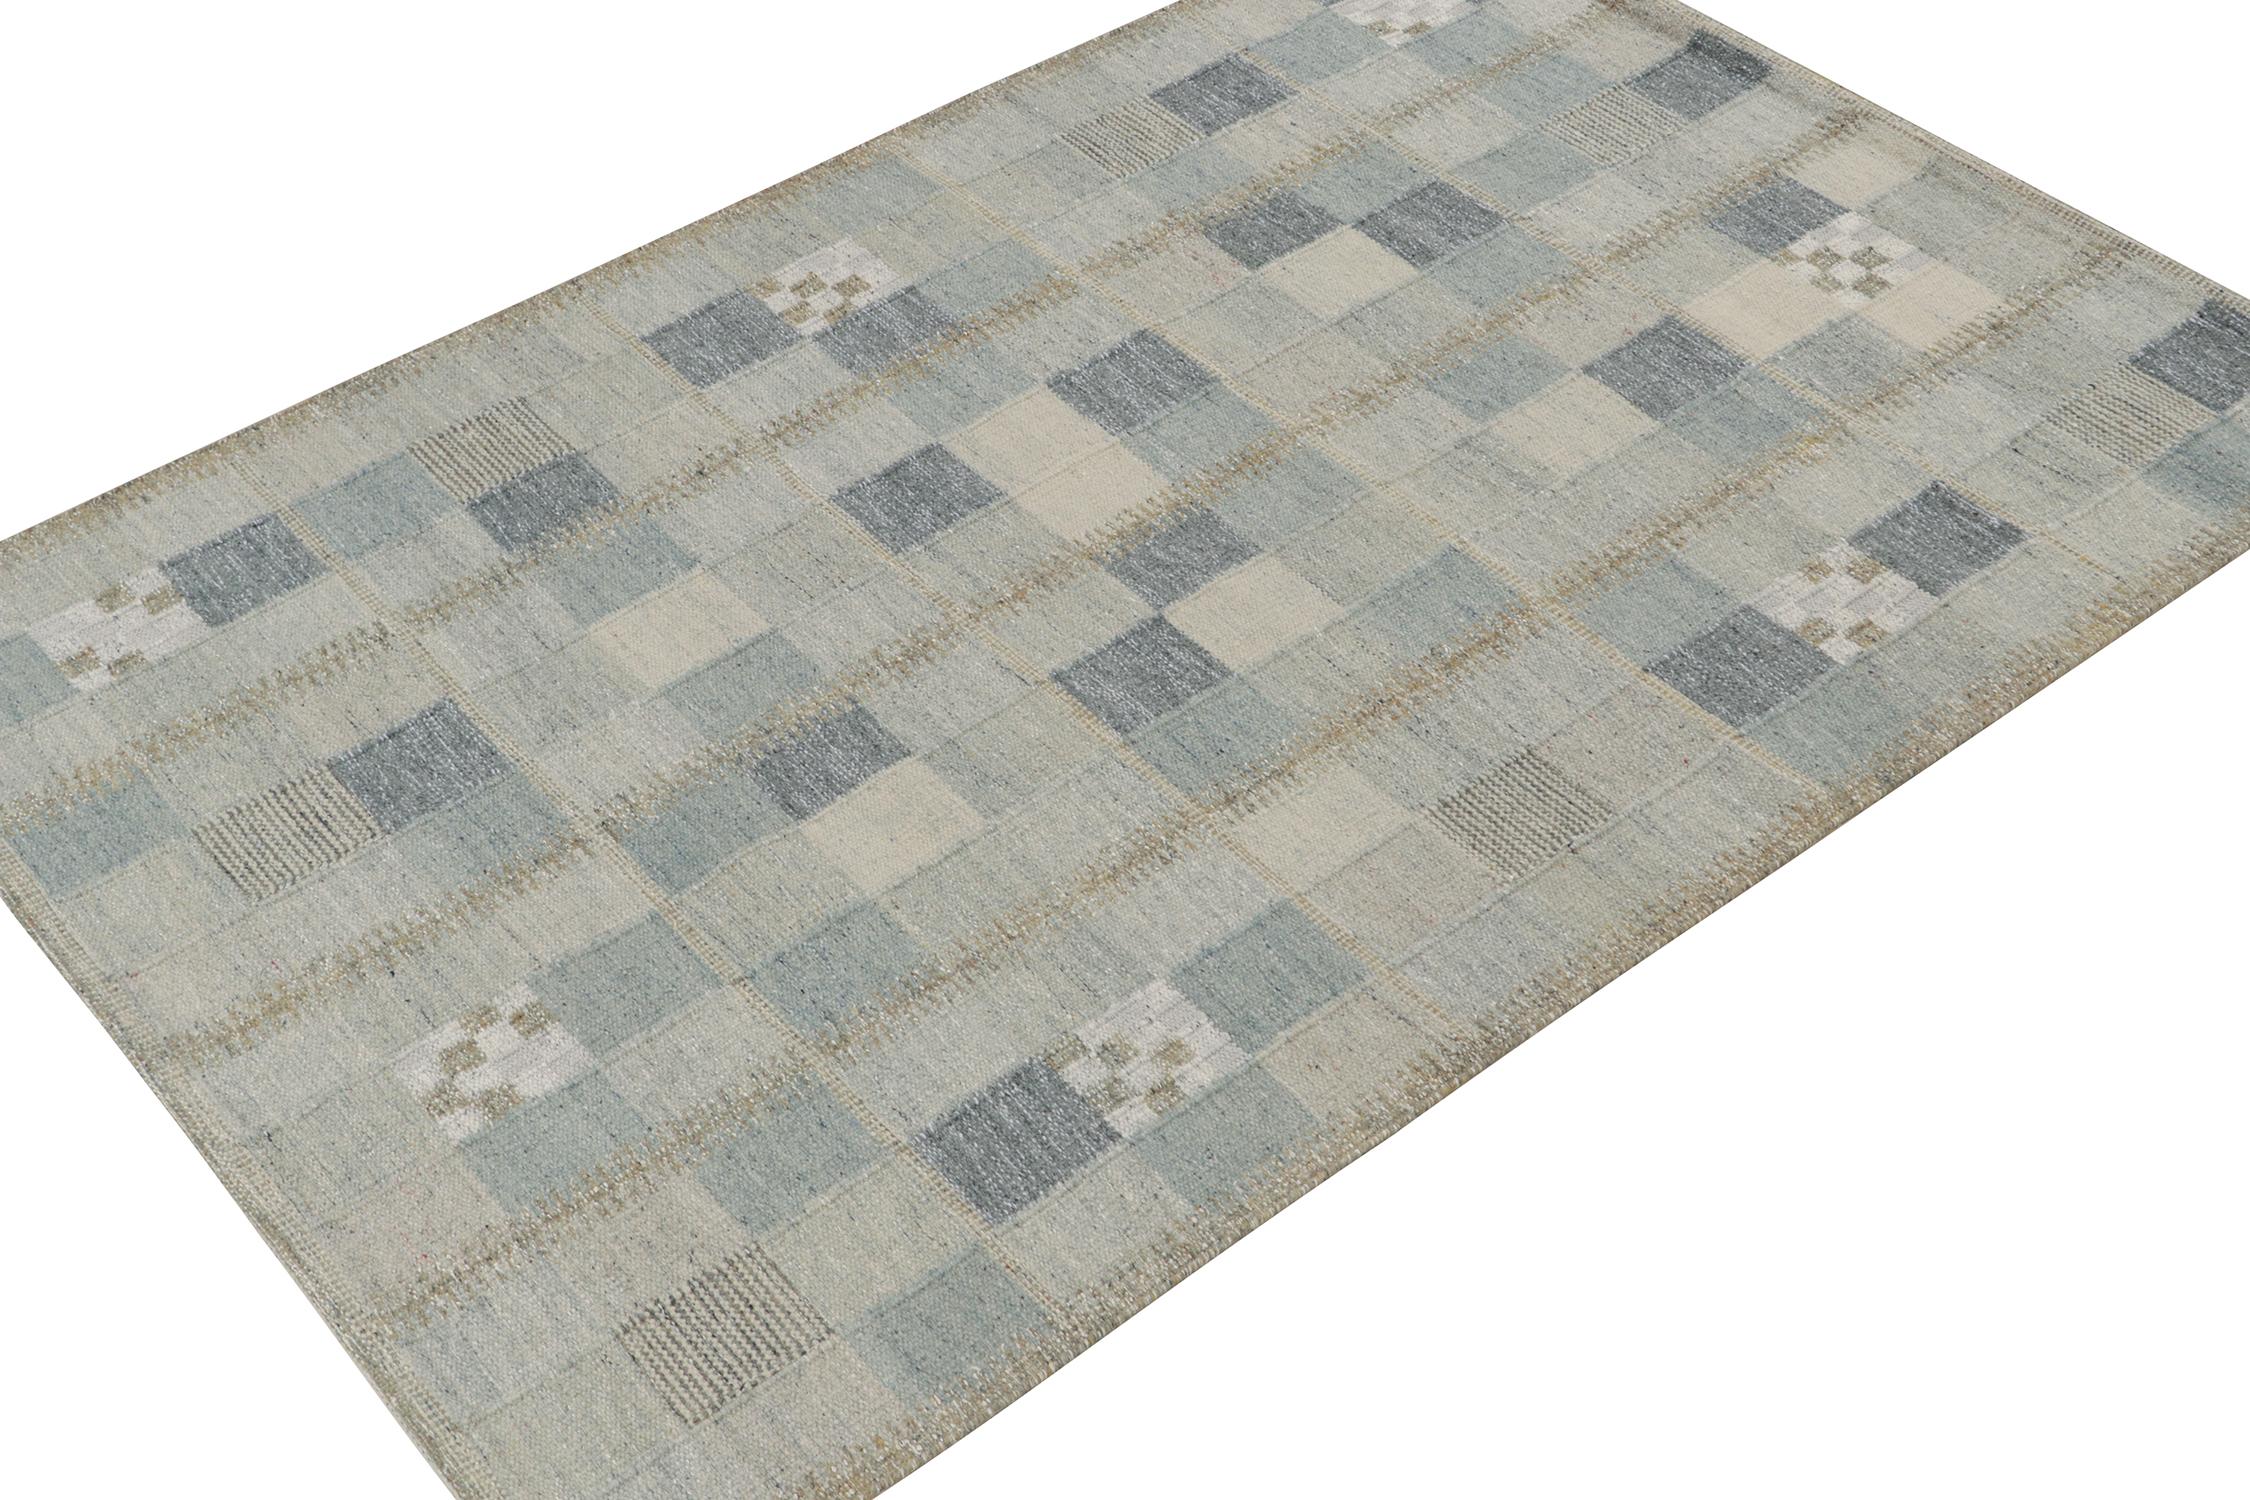 A smart 6x9 Swedish style kilim from our award-winning Scandinavian flat weave collection. Handwoven in wool. 
Further On the Design: 
This rug enjoys geometric patterns in blue, white and gray with the most complementary, natural presence